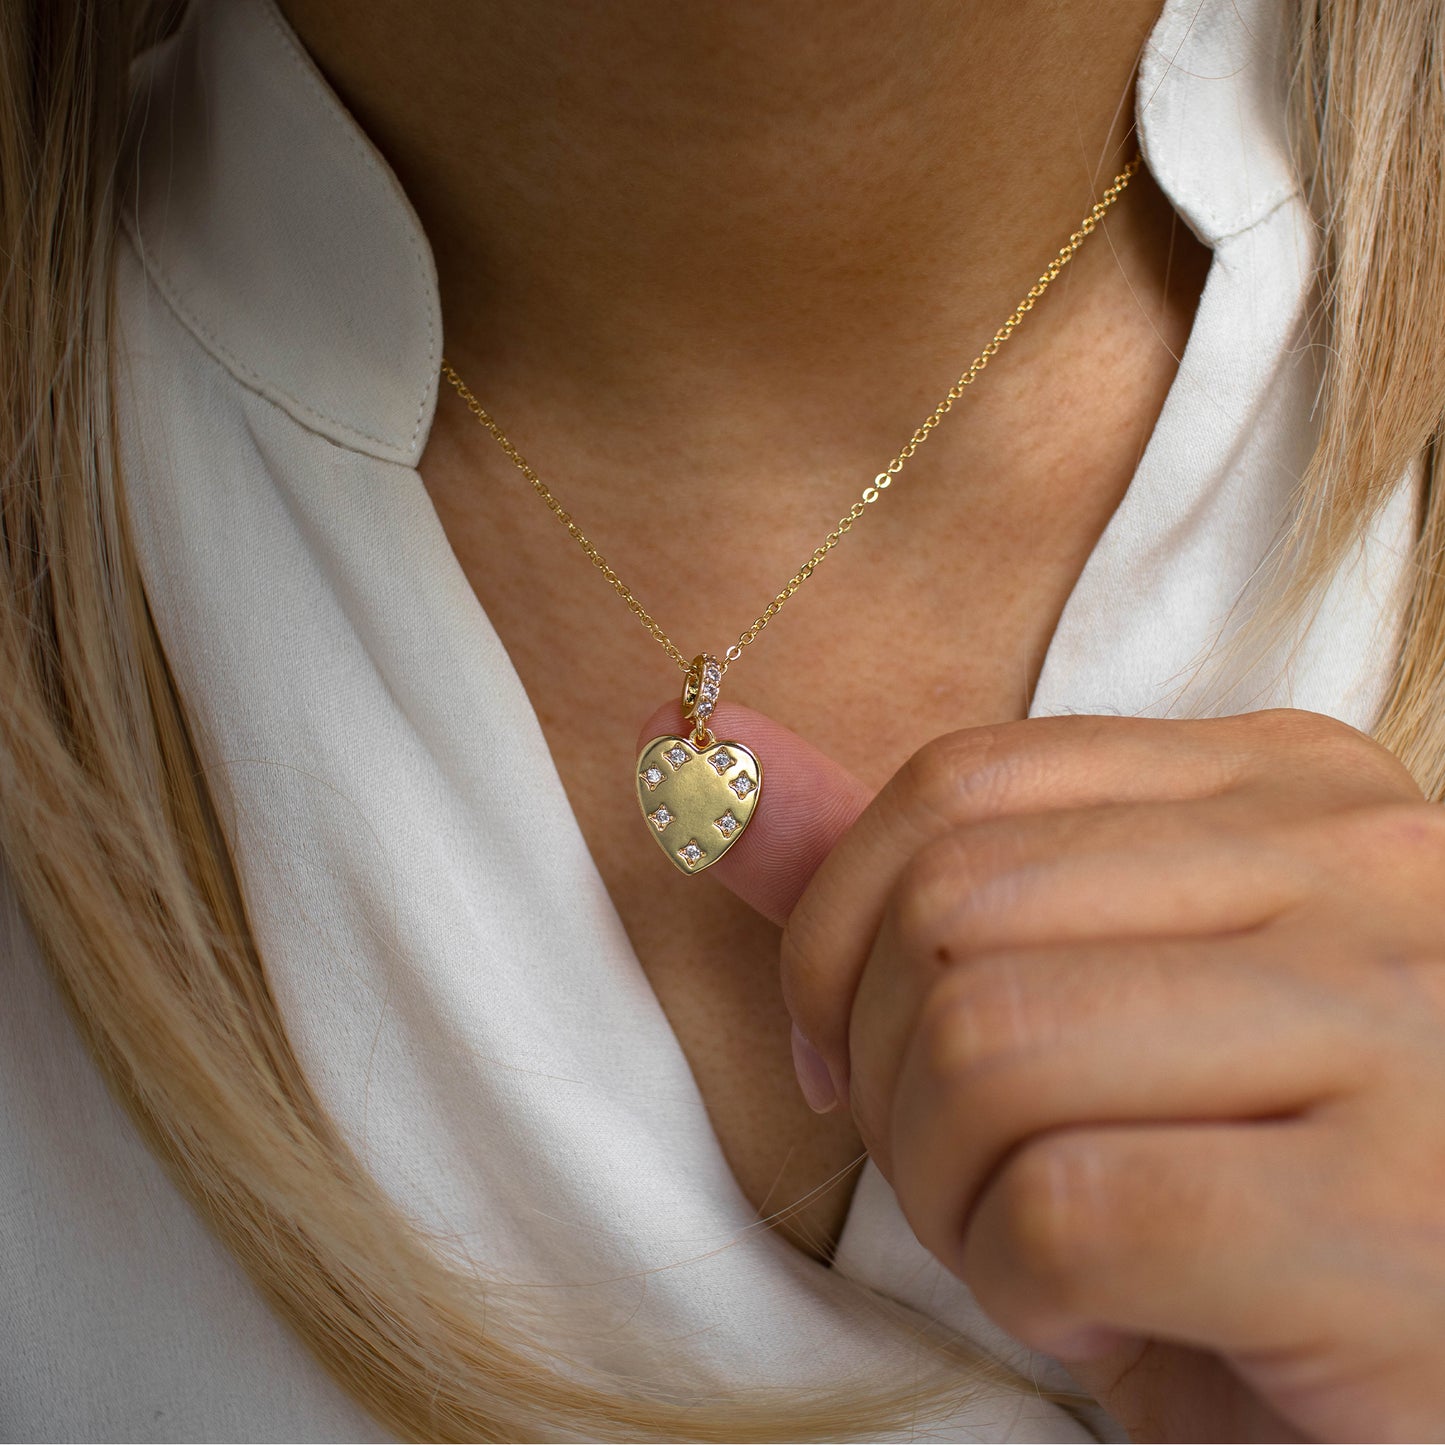 This photo features a thin chain necklace made of 14K gold-plated sterling silver, paired with zircon heart necklace